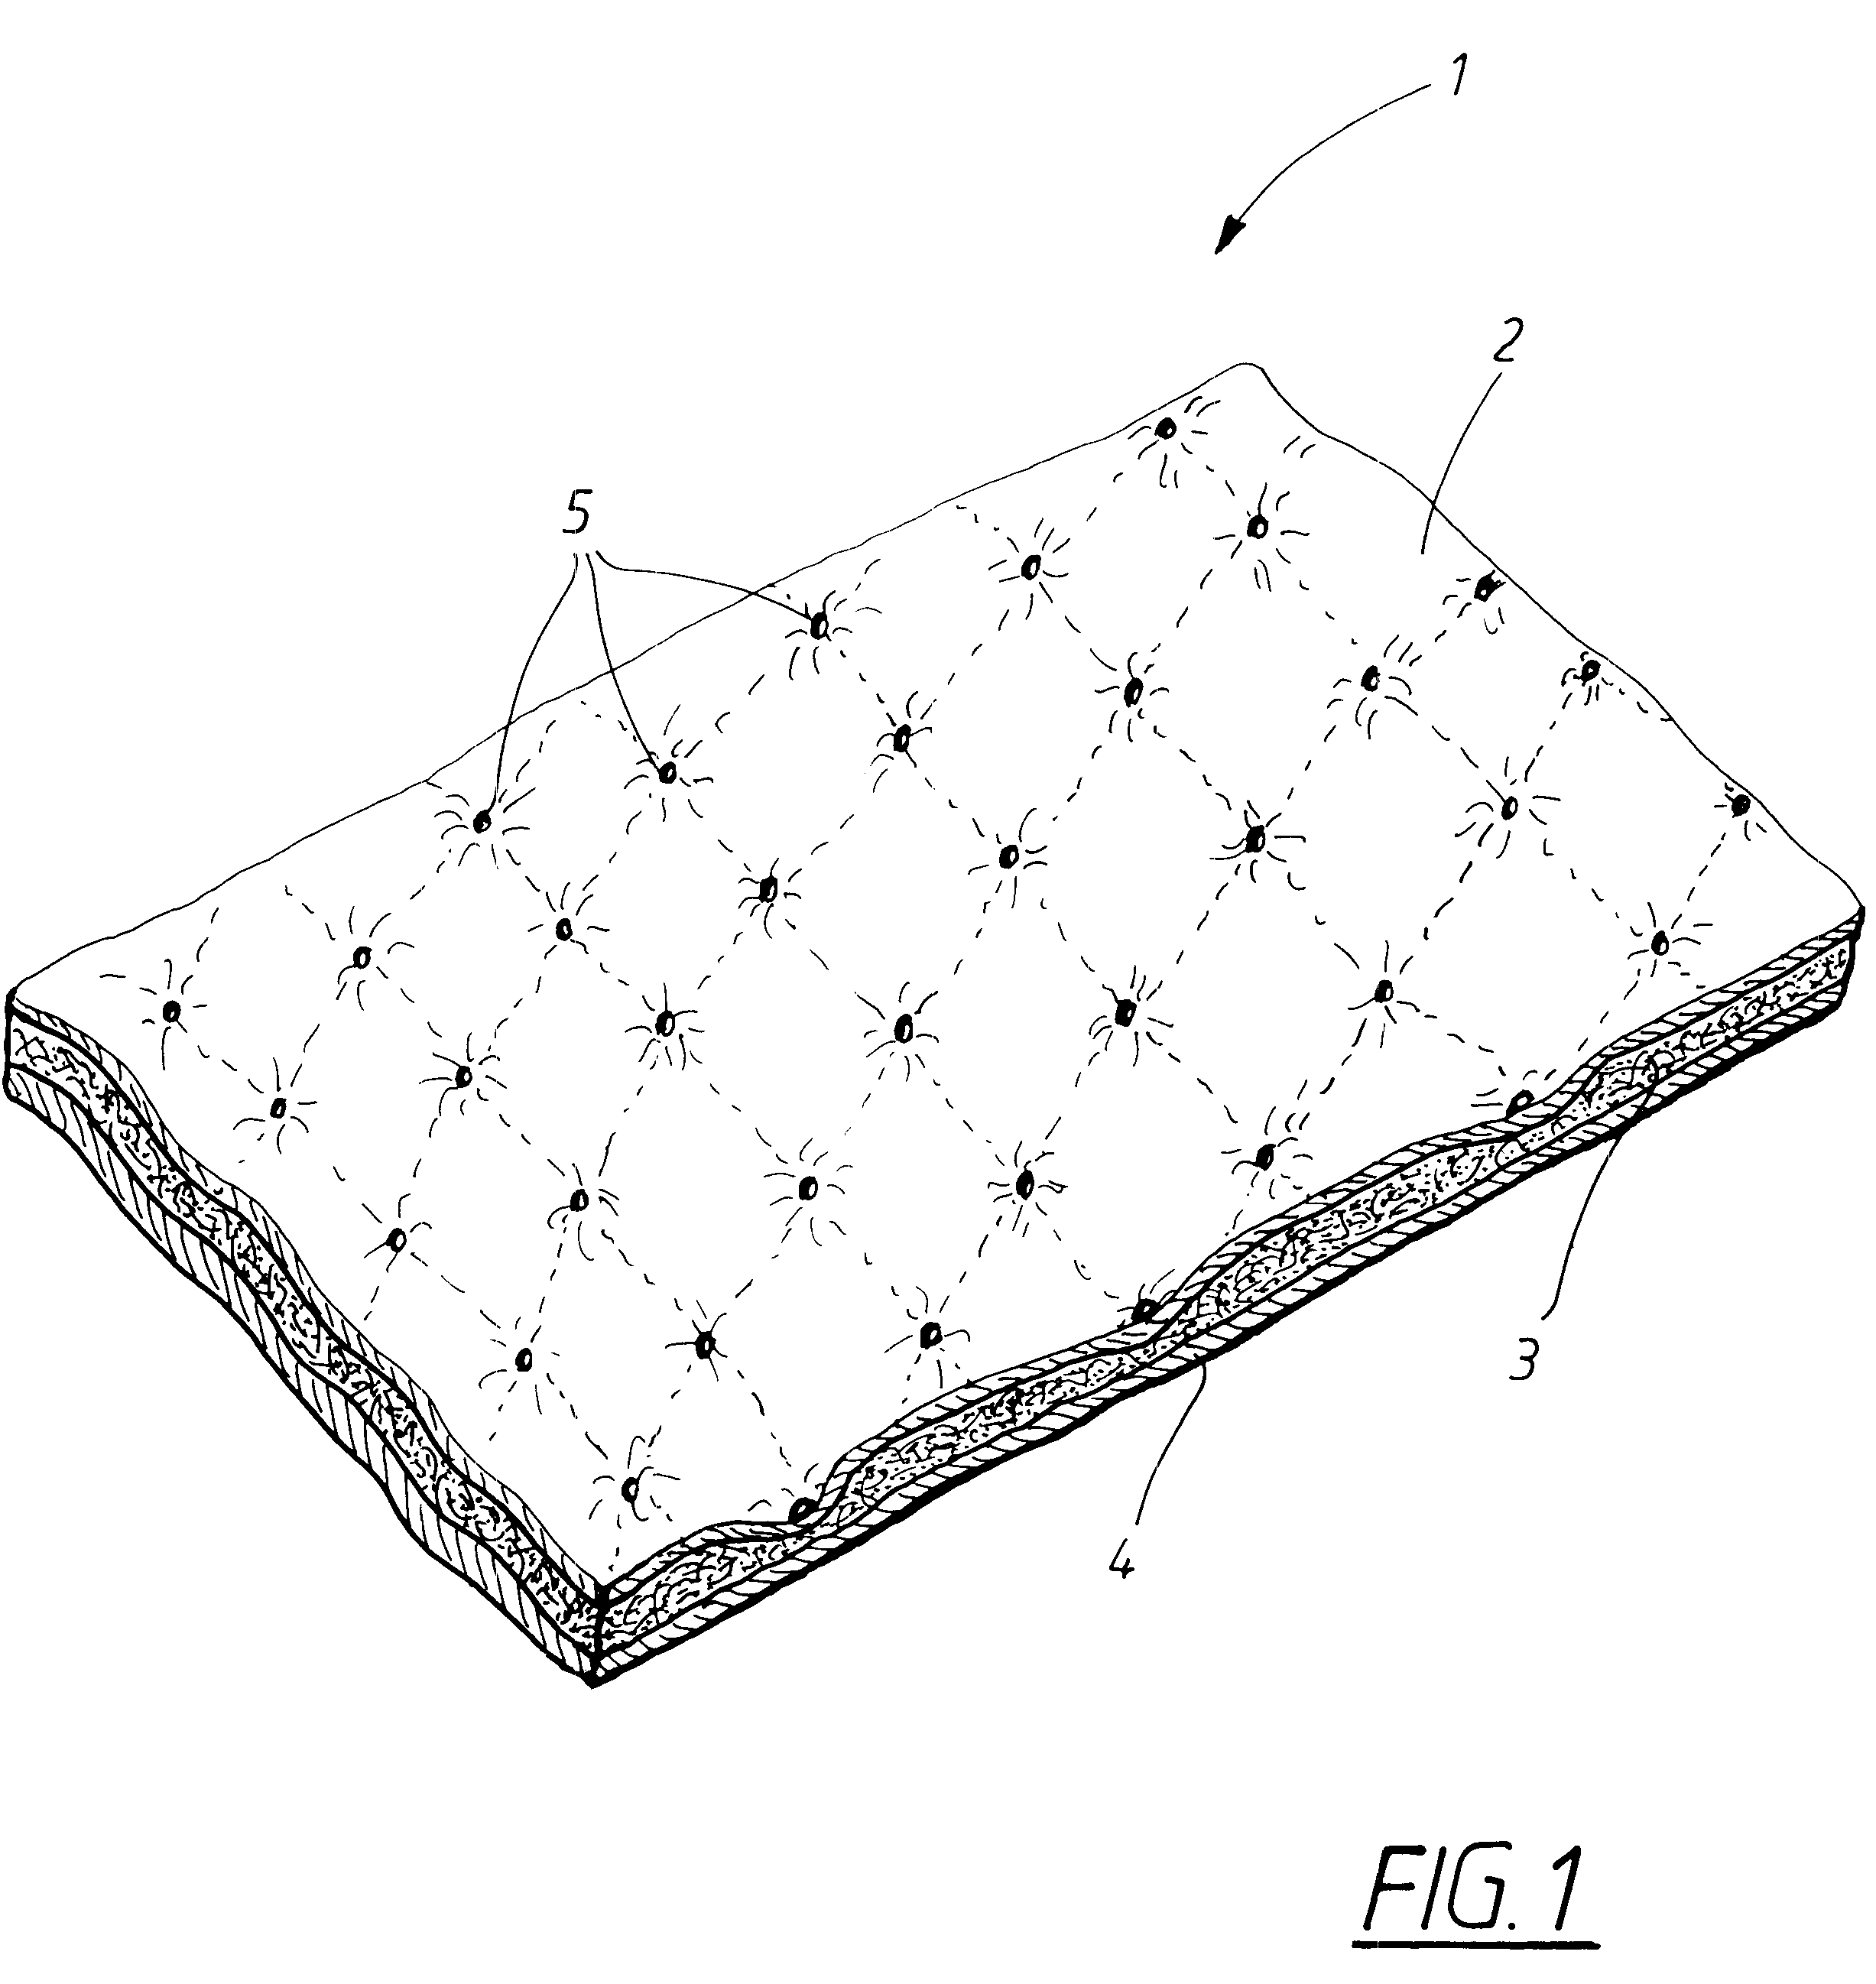 Absorbent product comprising at least one thermoplastic component to bond layers